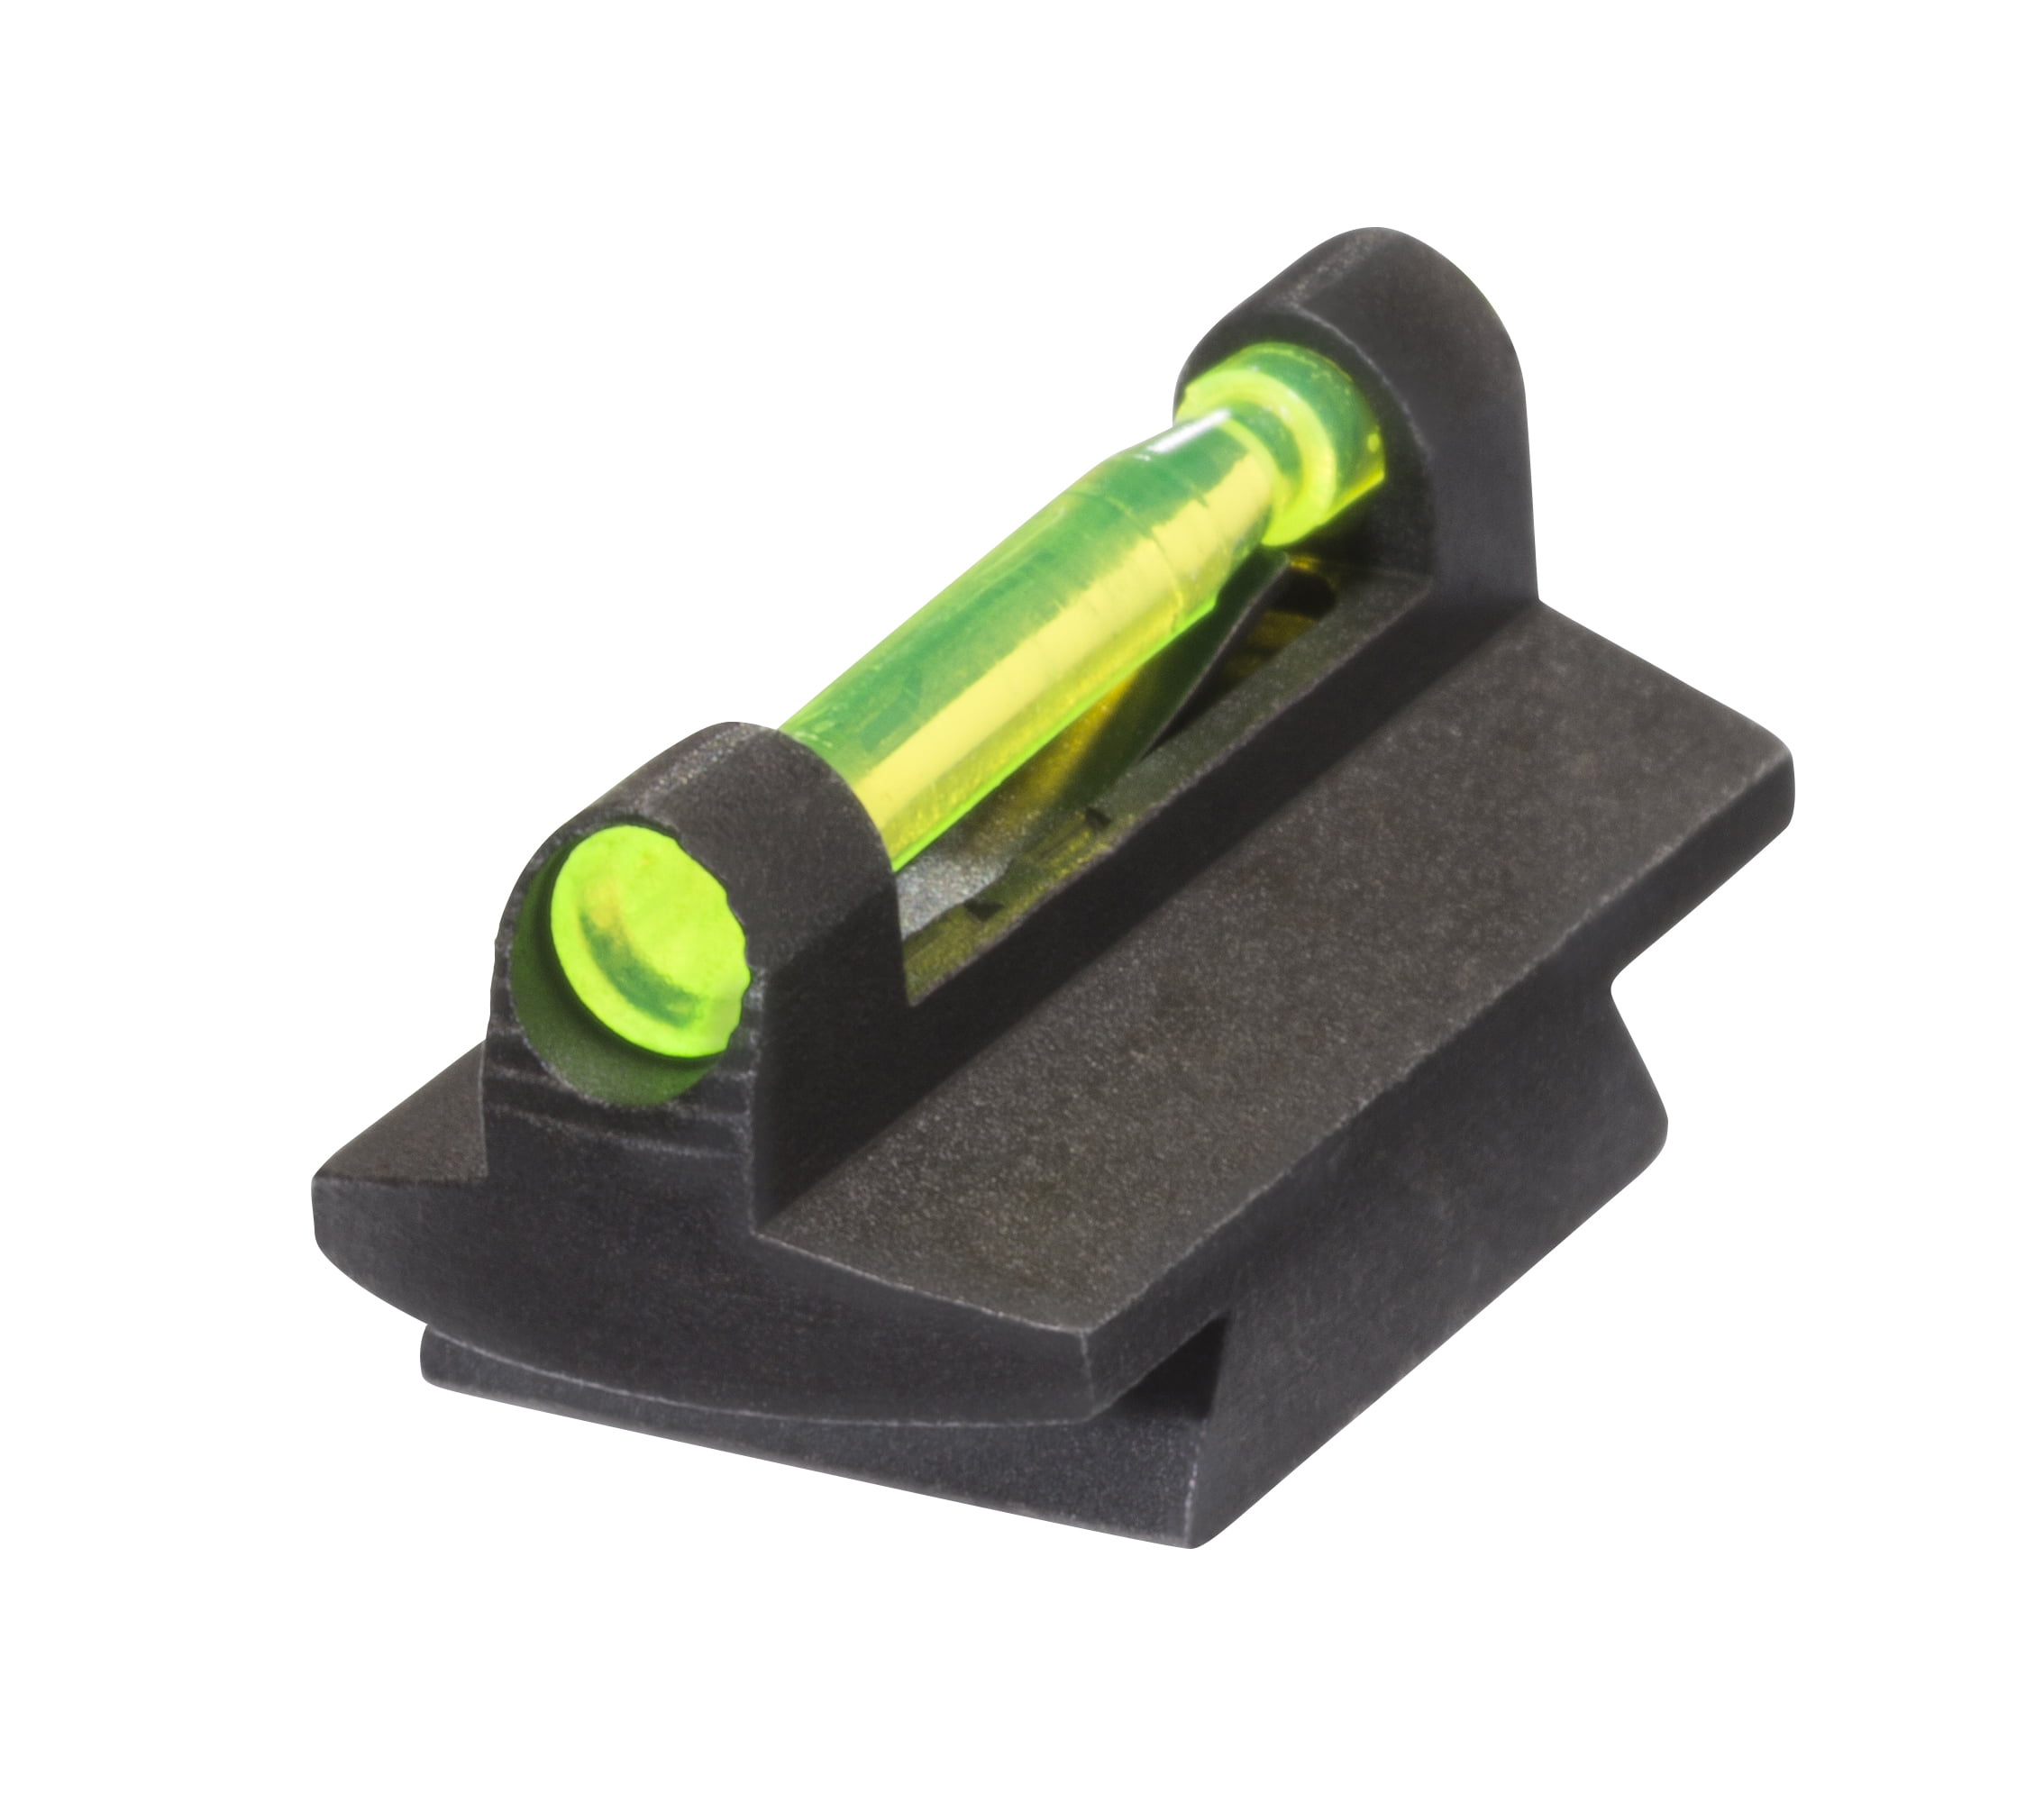 Adjustable GLOWING FIBER Optic FRONT/REAR Sight Tower for 3/8" 11mm dovetail 